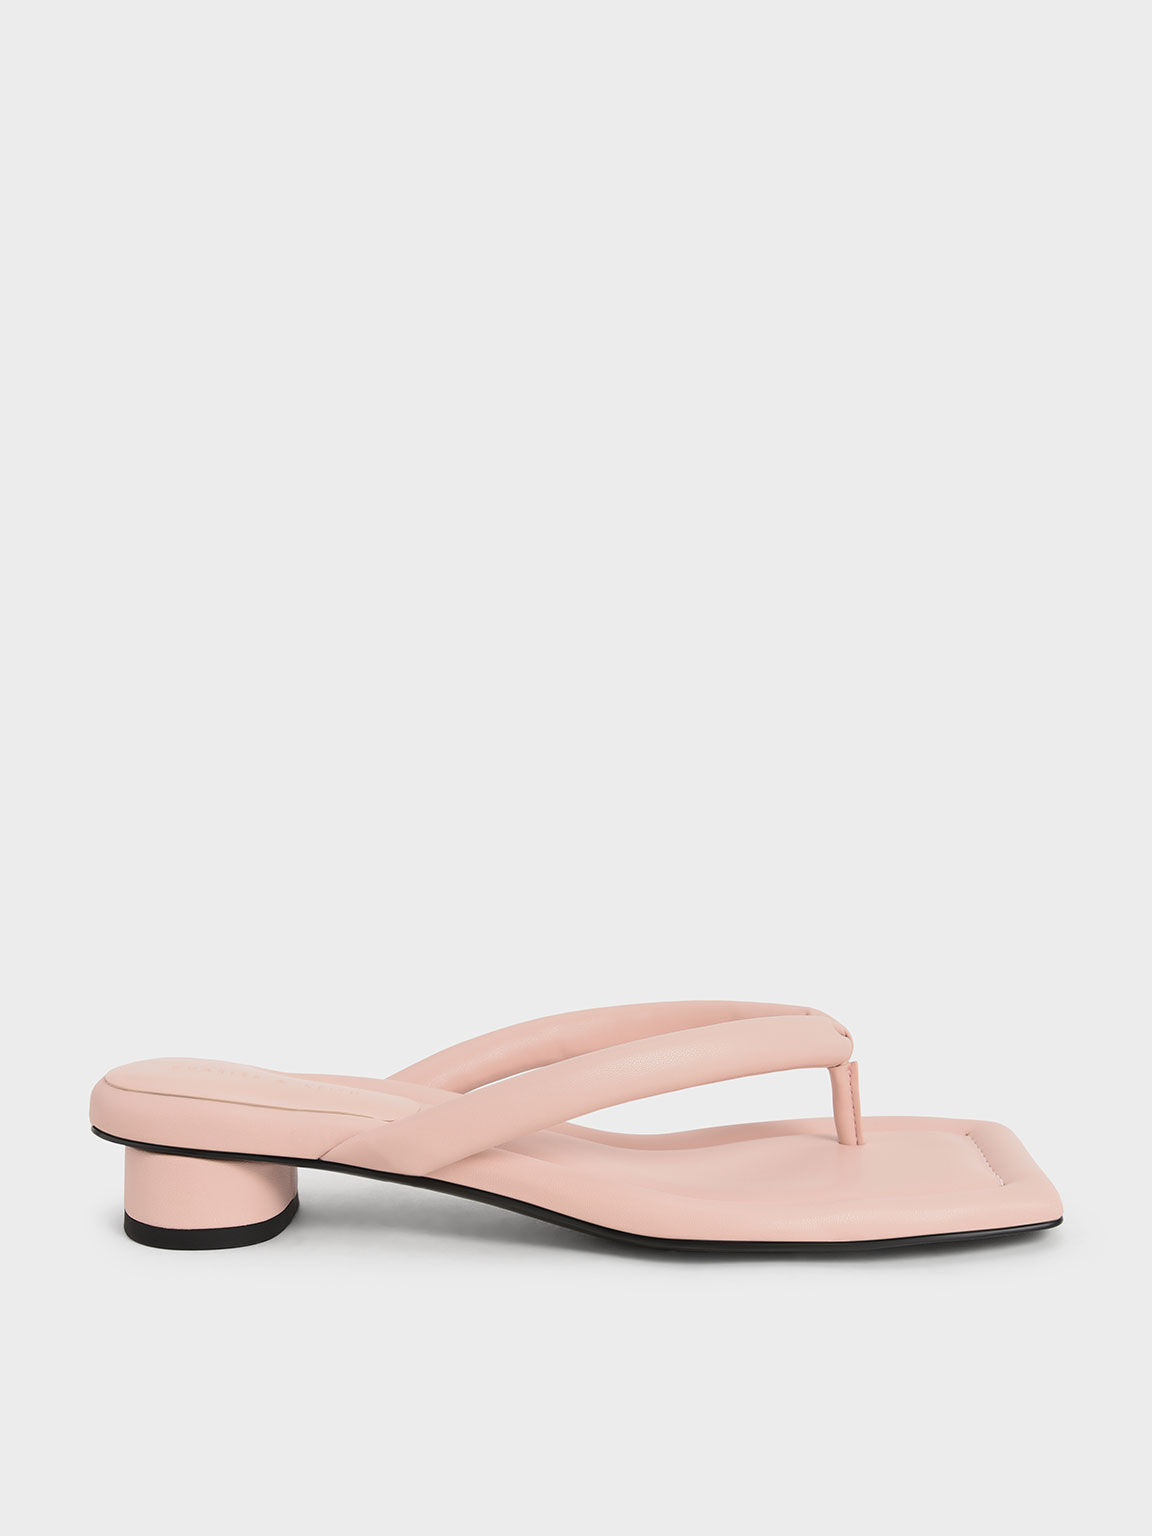 Charles & Keith Linen Asymmetric-toe Puffy Thong Sandals in Light Pink Womens Shoes Flats and flat shoes Flat sandals Pink 